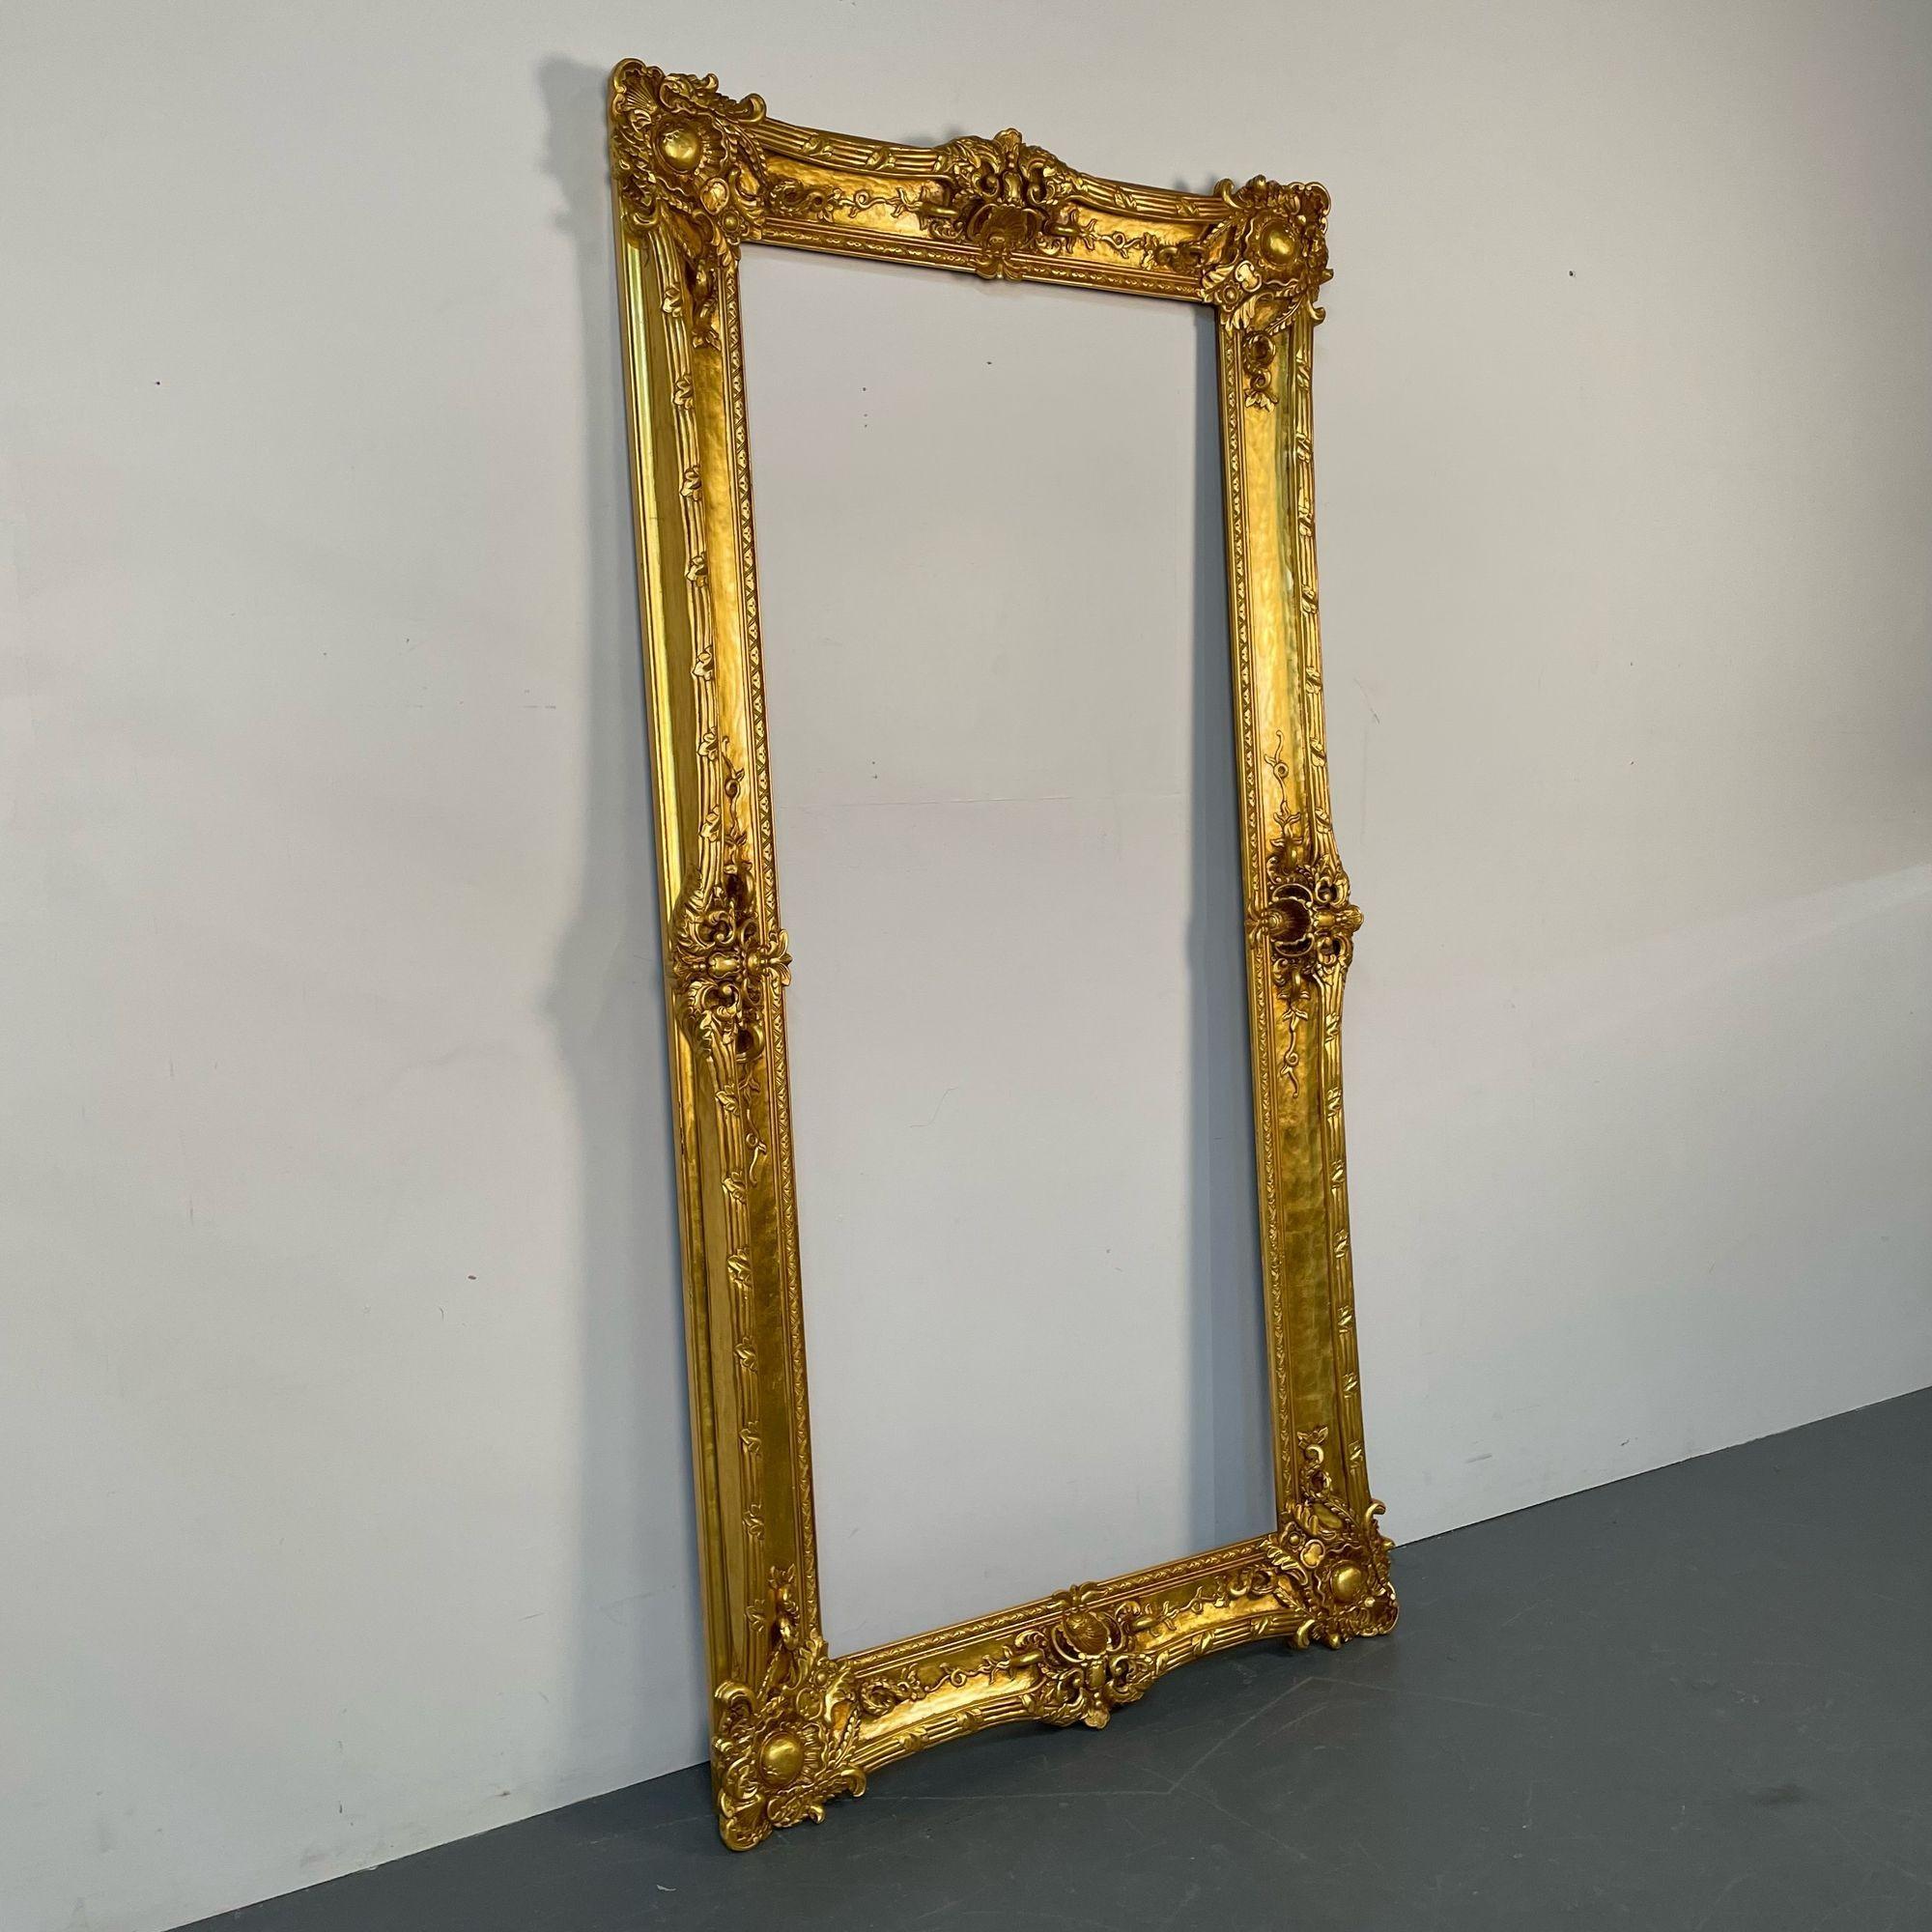 Giltwood Painting, Mirror or Picture Frame, Monumental, Carved
 
A finely carved picture or art frame having a empty center which can accommodate a mirror or a painting or picture. The frame is stunning with carved roses, scroll and leaf design in